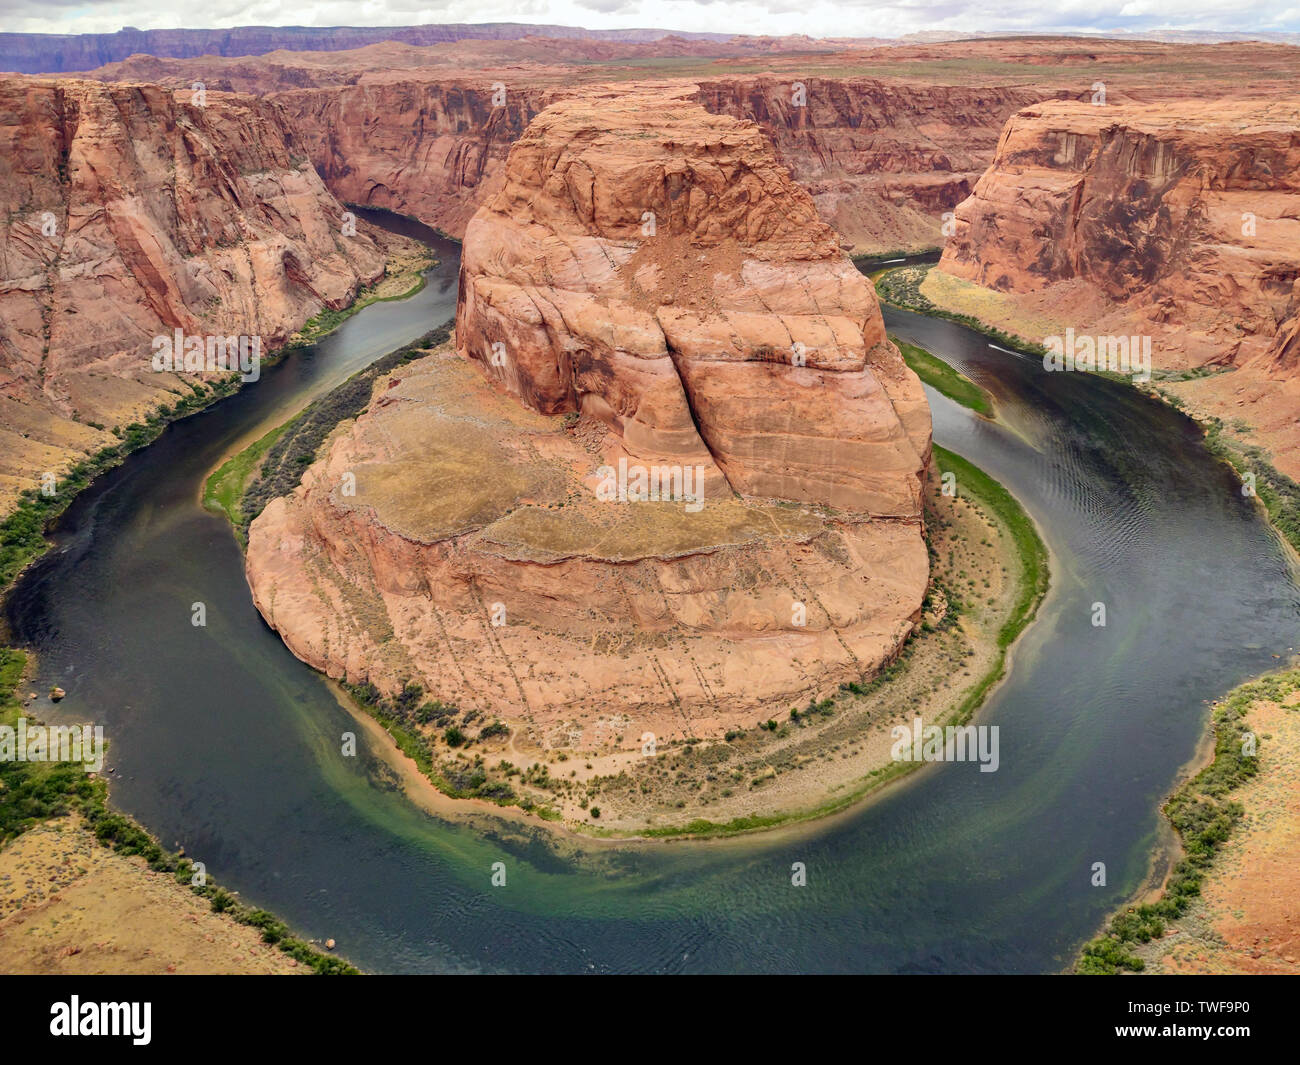 Horseshoe bend, Arizona, United States. Horseshoe-shaped incised meander of the Colorado River near the town of Page Stock Photo